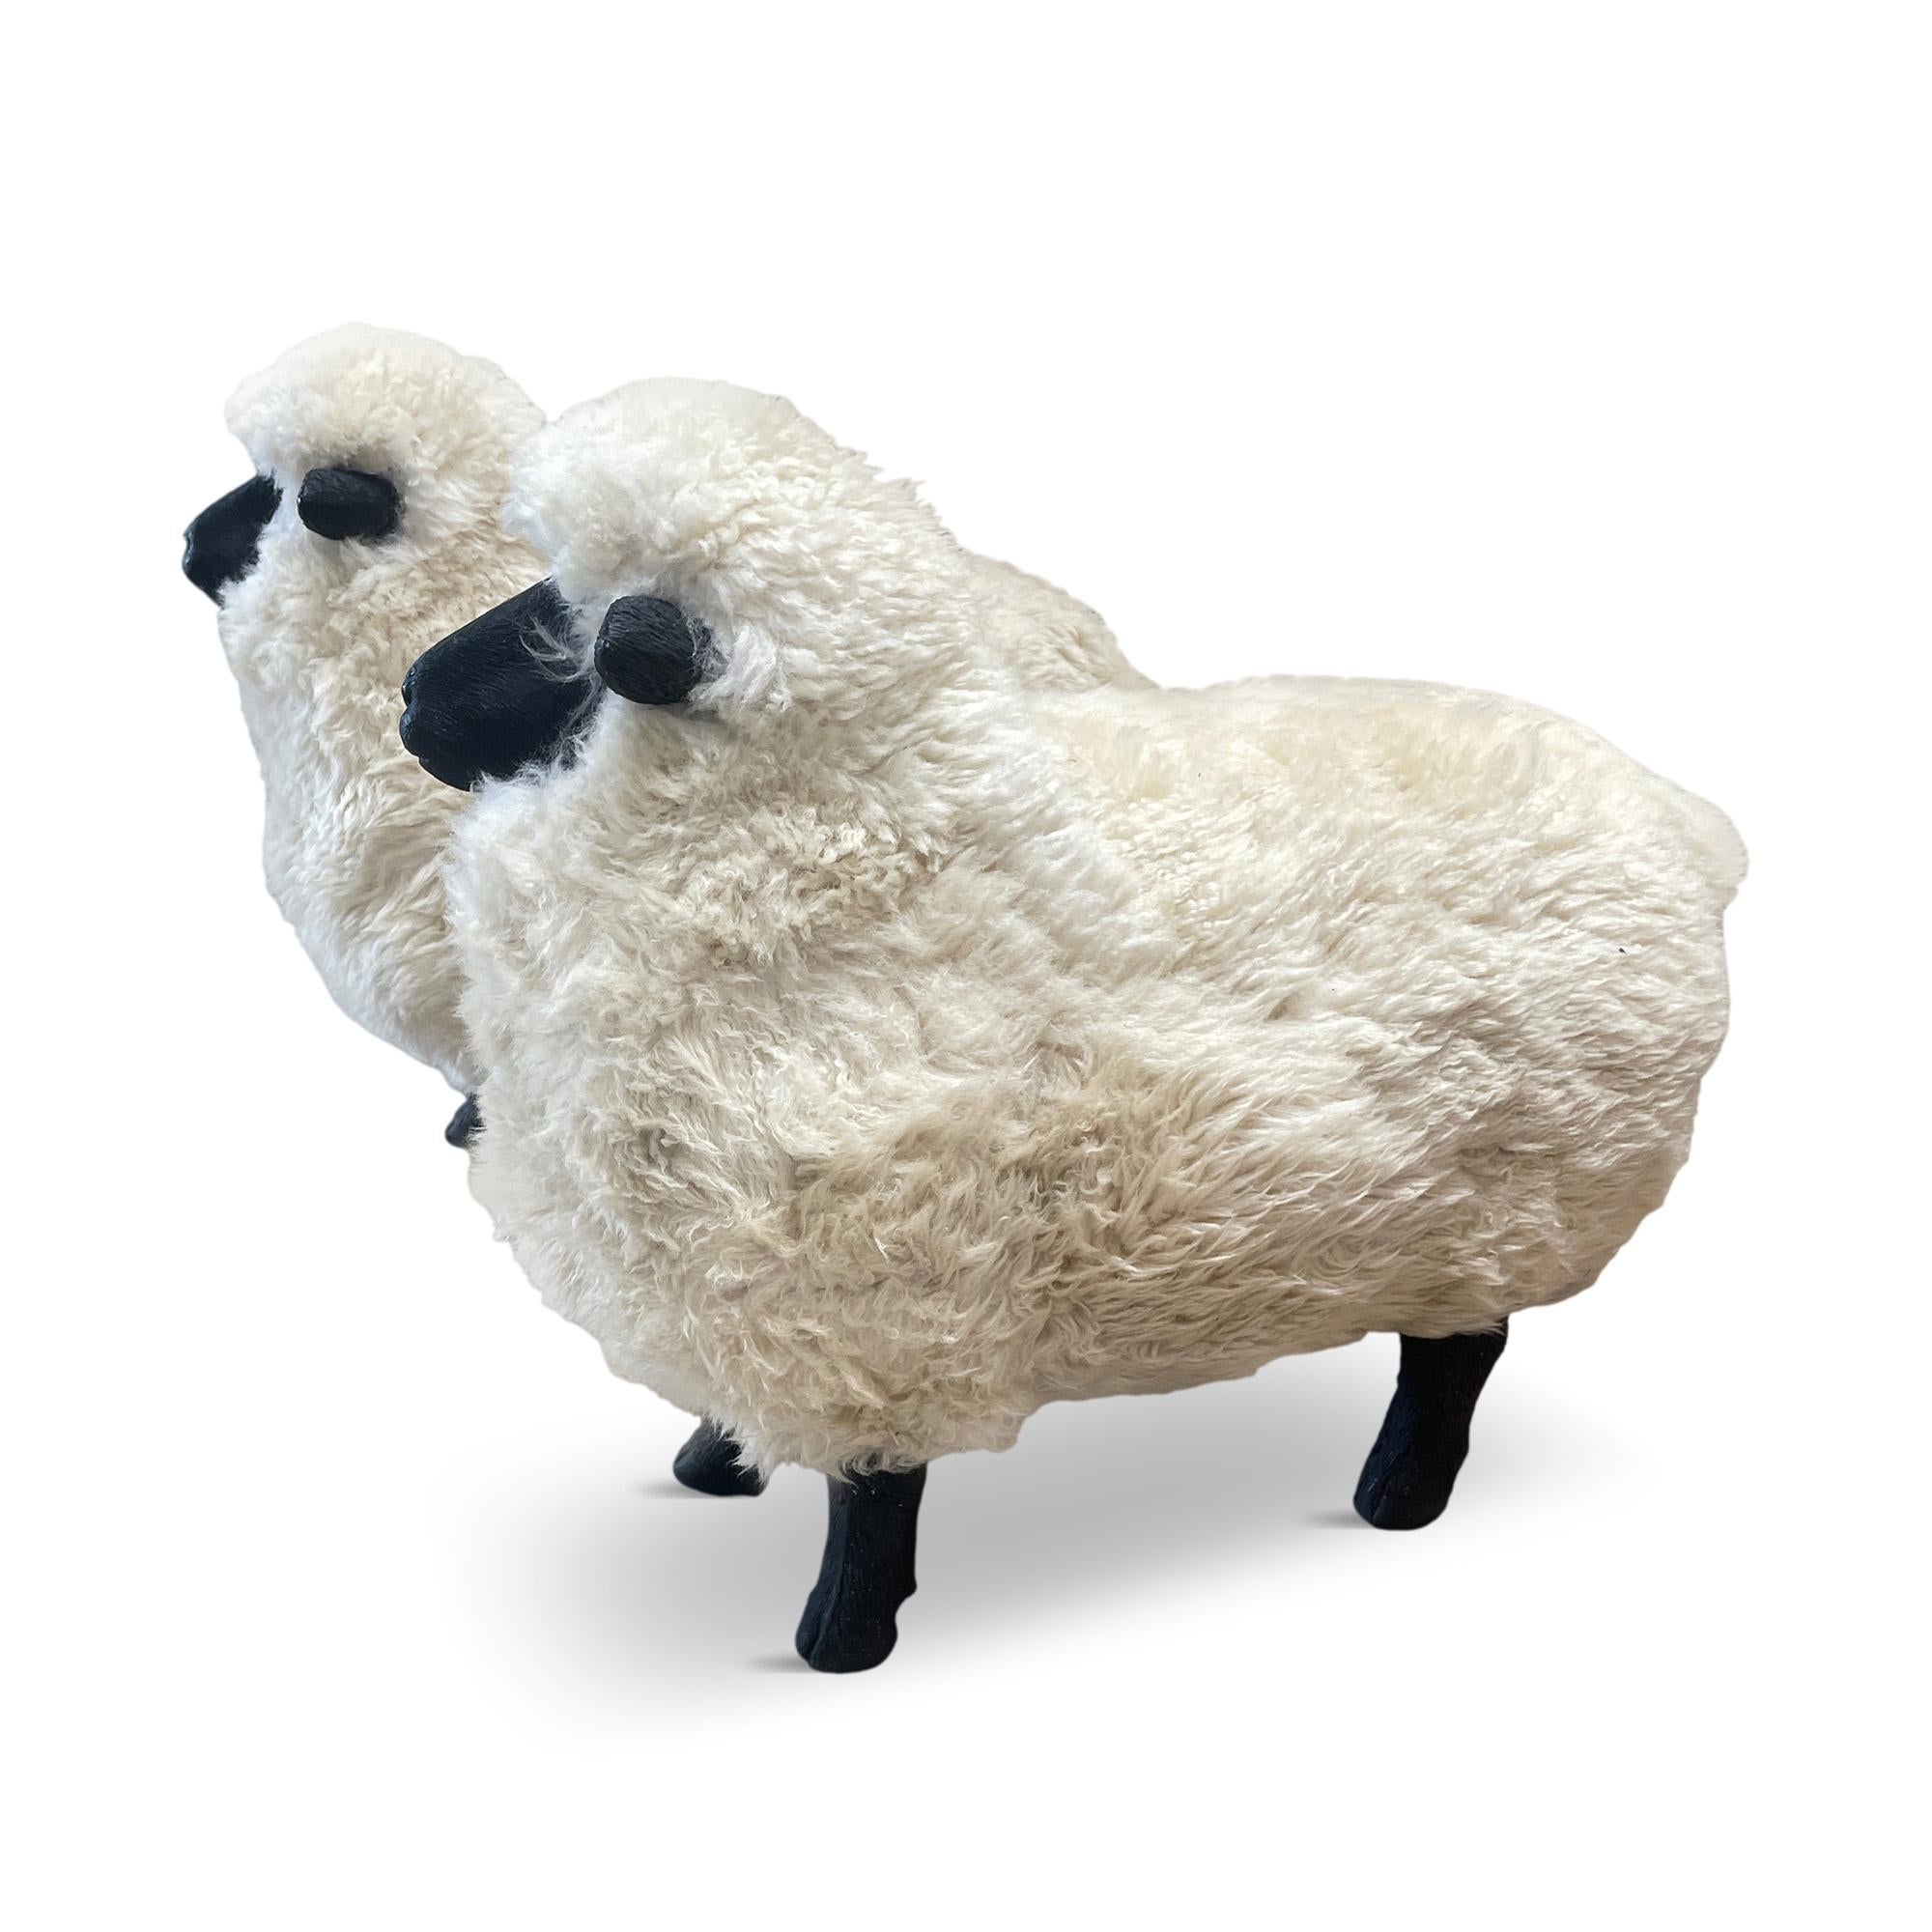 Inspired by the iconic style of François-Xavier Lalanne, renowned French artist and sculptor known for merging surrealism and Art Nouveau. Lalanne's sculptures epitomize a unique fusion of fine art and functionality. These sheep ottomans pay homage